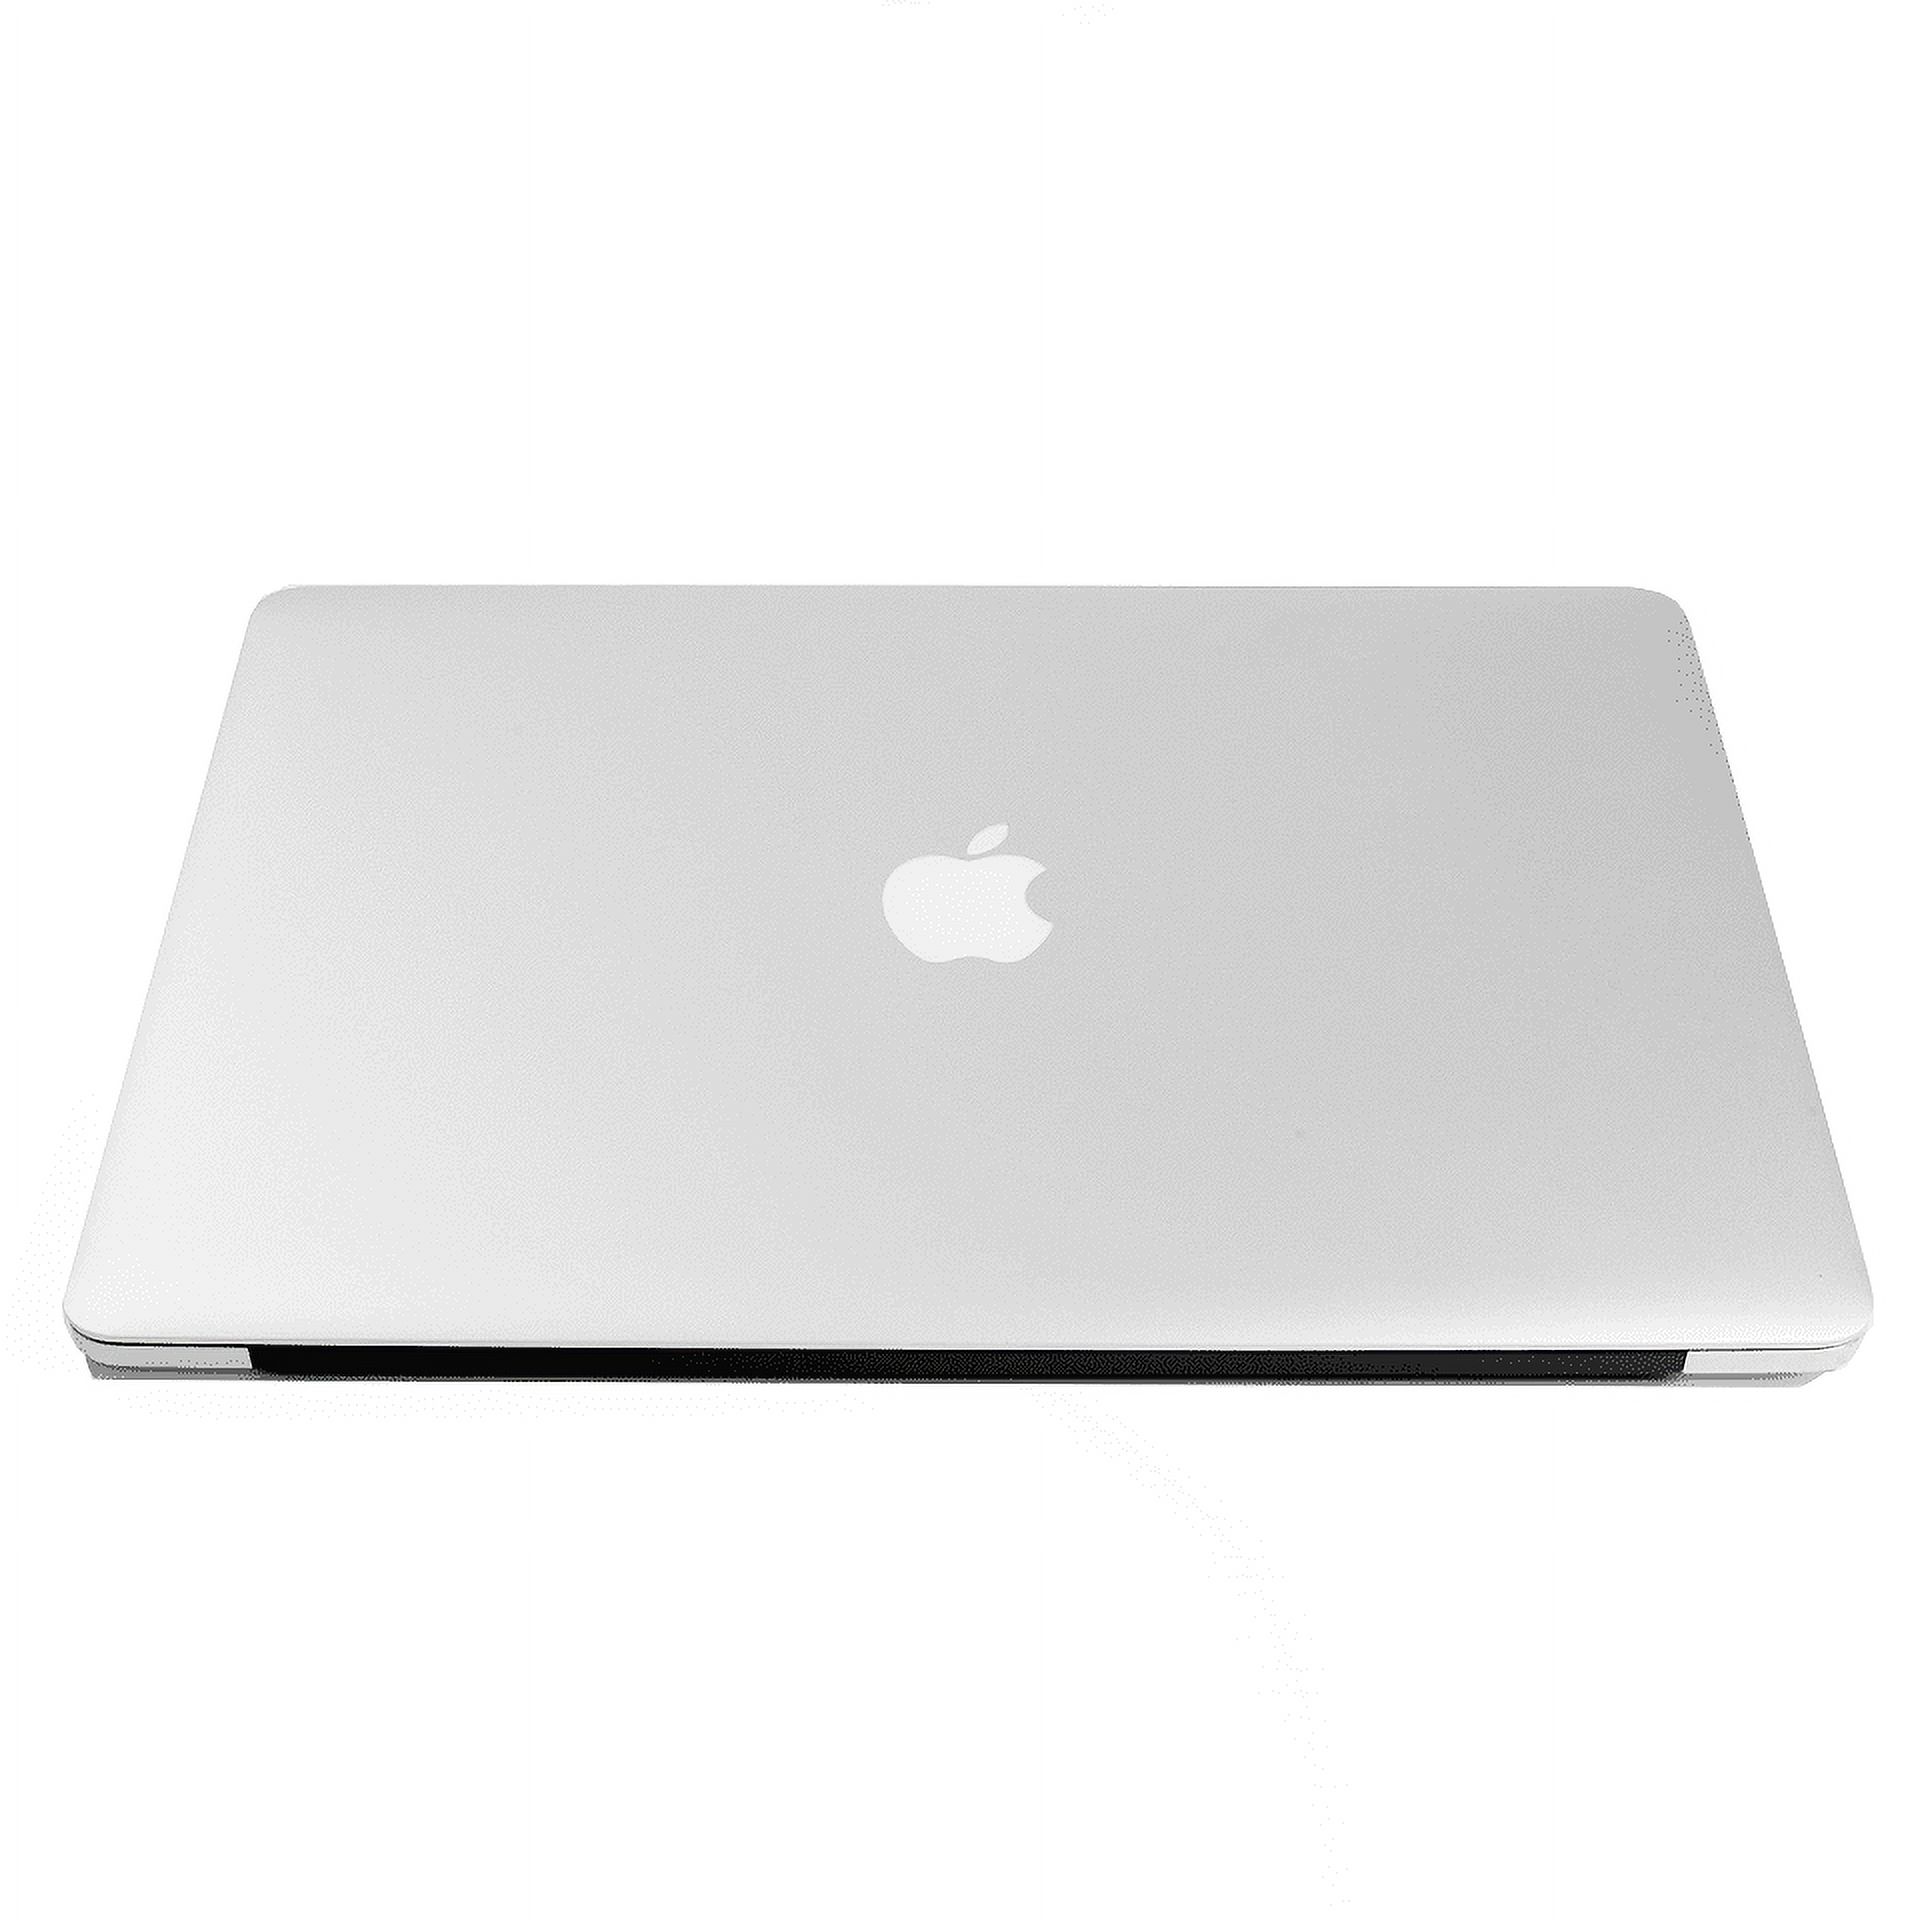 Apple Macbook Pro 15.4 inch Laptop, 2.5GHz i7 Retina Force Touch 16GB DDR3 Memory, 512 GB SSD - Used - image 1 of 4